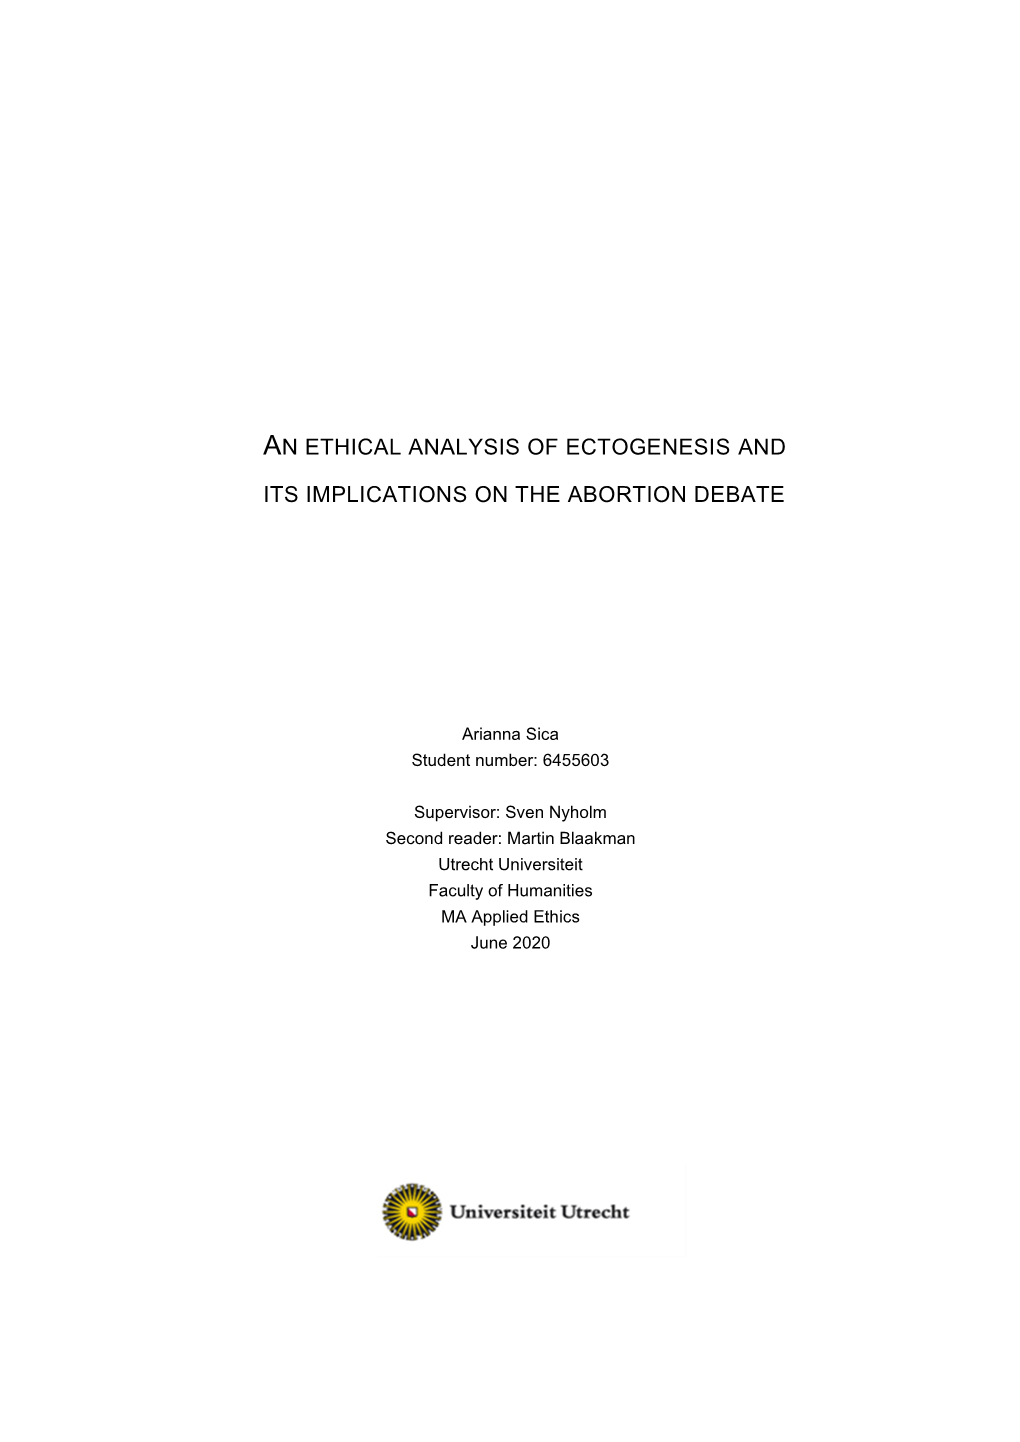 An Ethical Analysis of Ectogenesis And